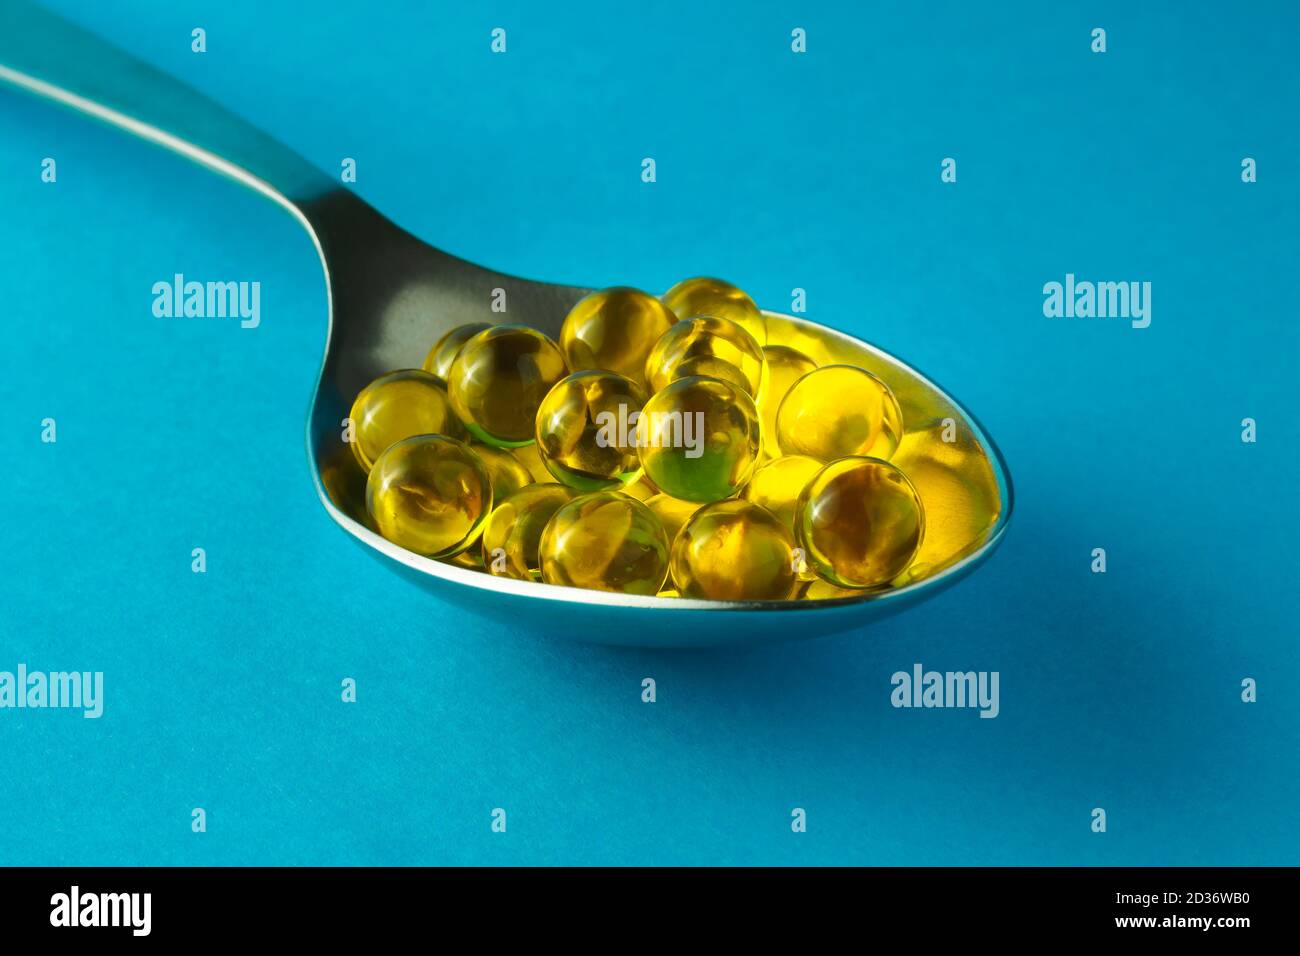 Heap of round fish oil capsules in metallic spoon on blue background, selective focus, close-up Stock Photo